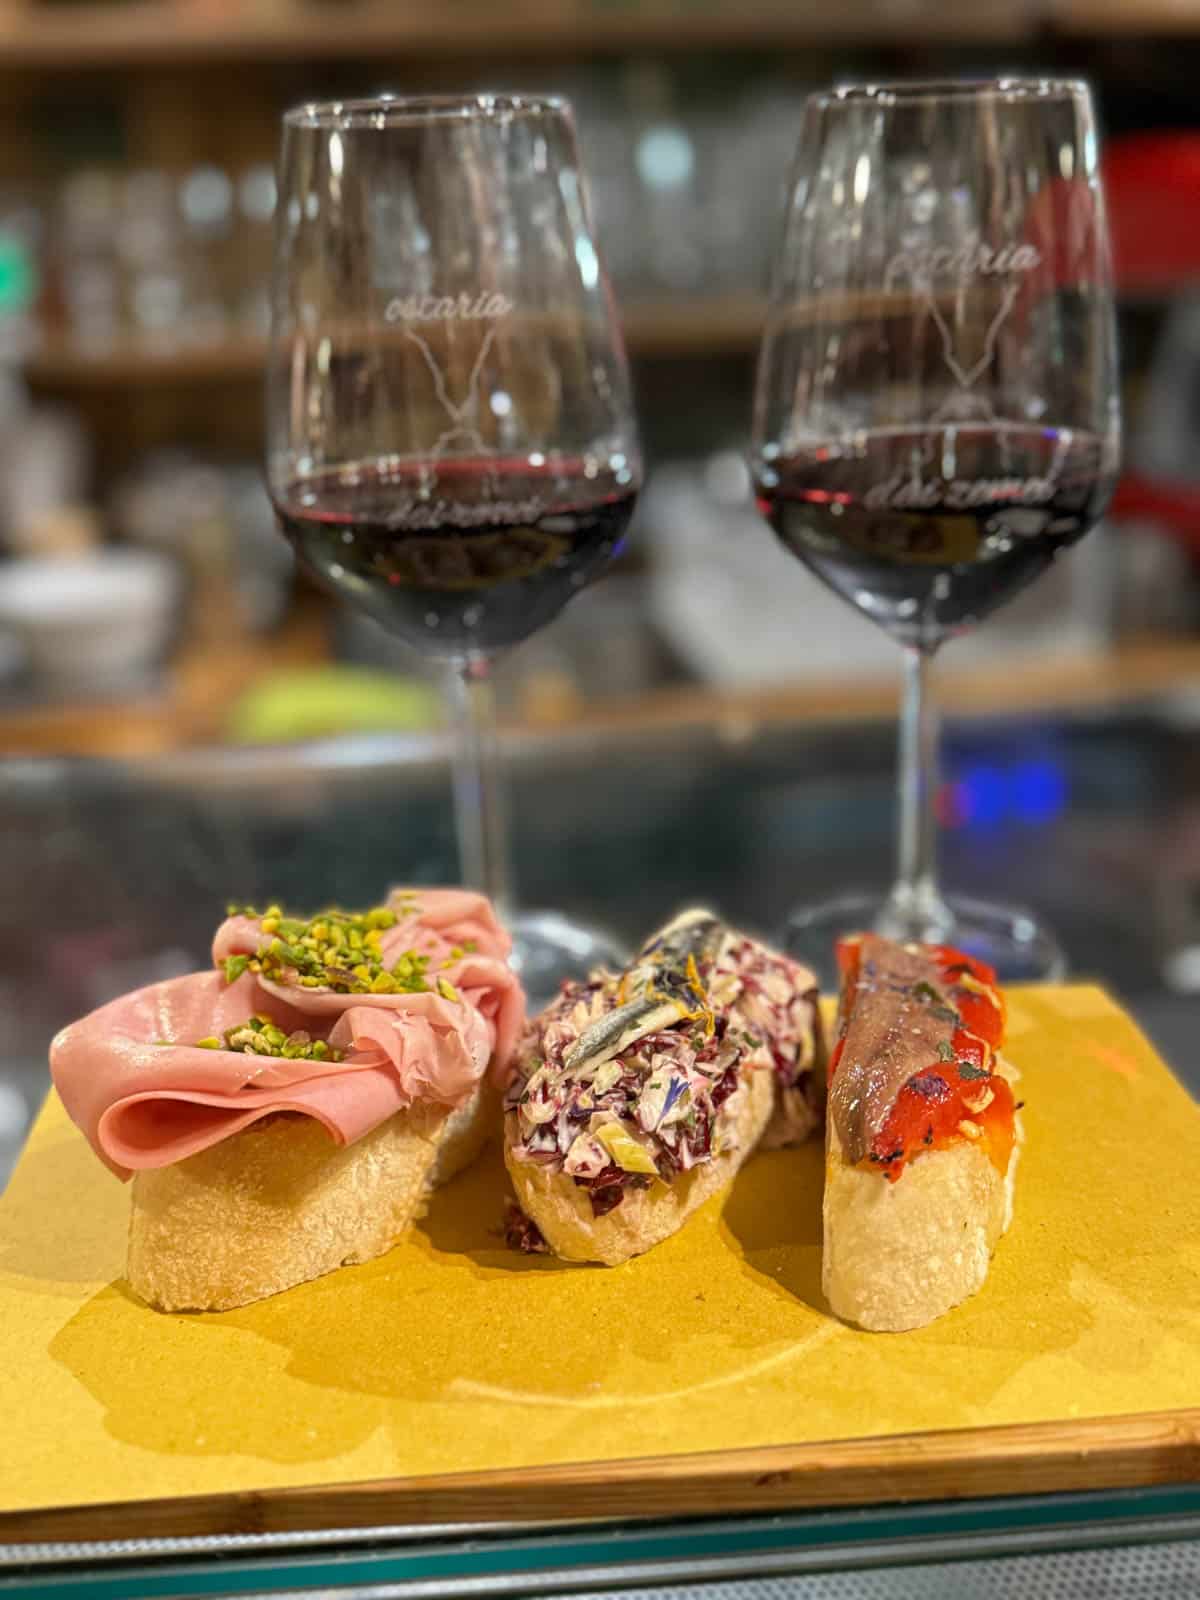 Appetizers on baguettes with glasses of wine.